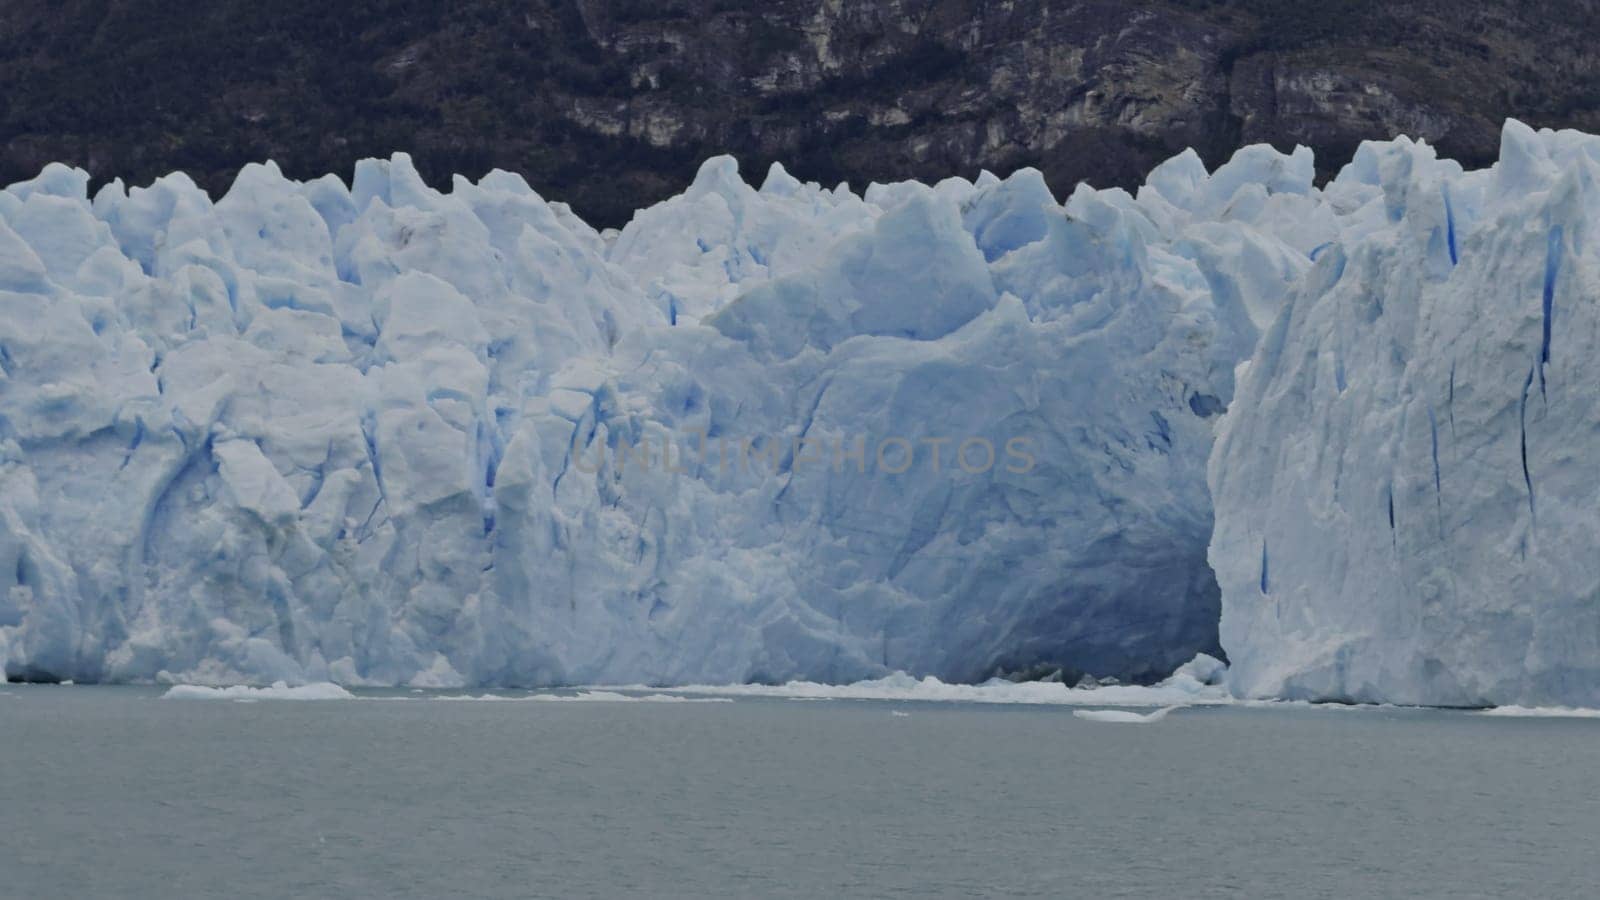 Boat tours mesmerizing glacier with ice caves in arctic scenery.